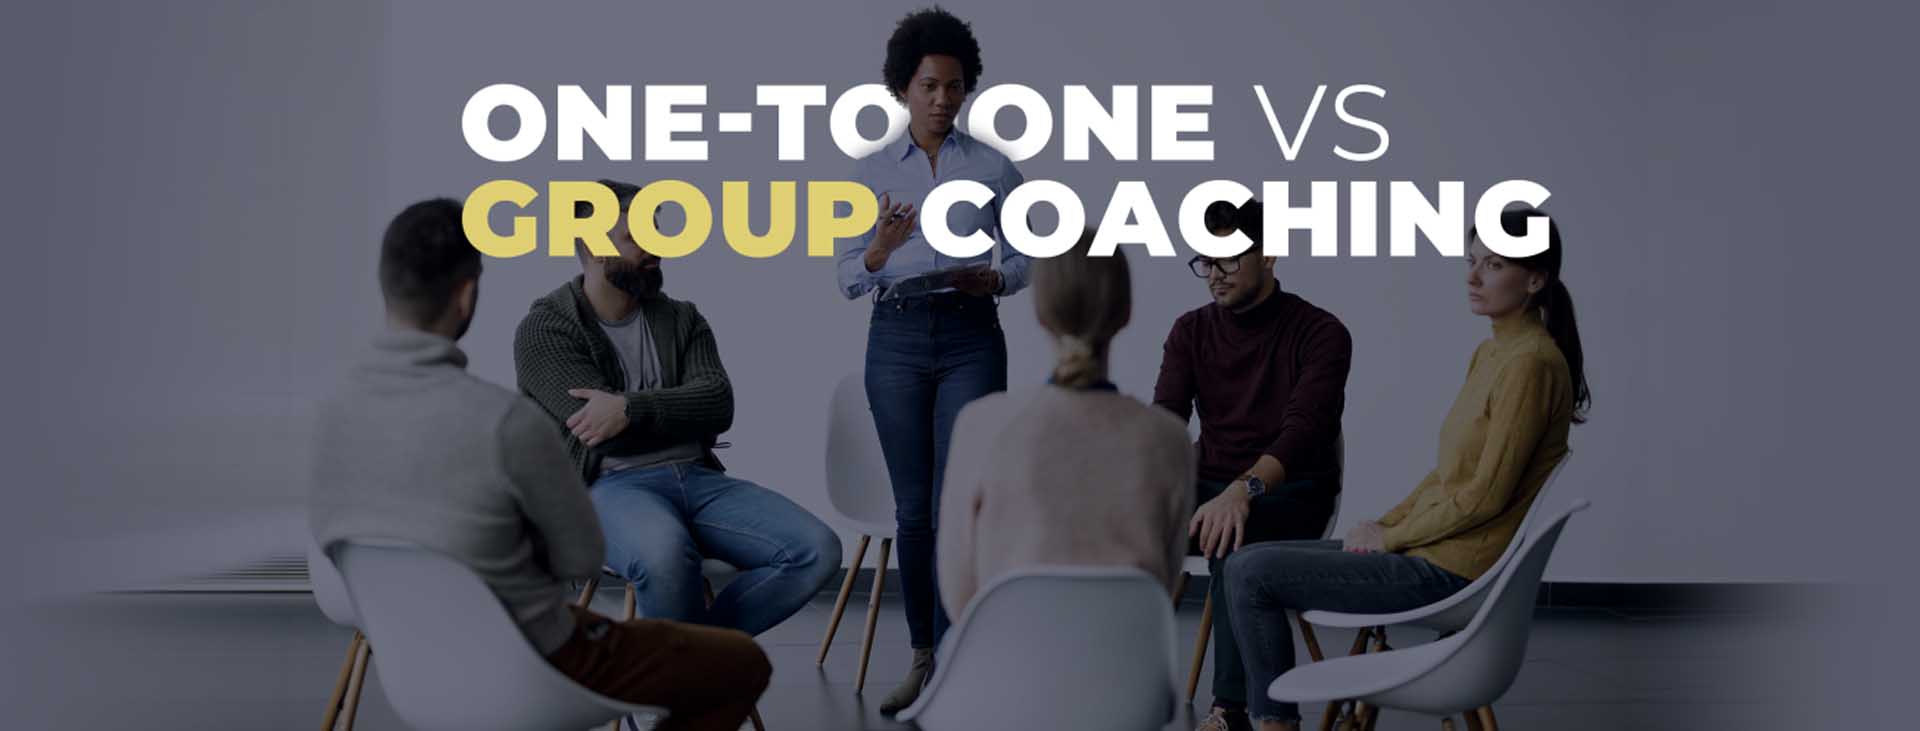 Mentoring Matters - One-to-One Coaching vs Group Coaching: Which is Right for You in 2023?